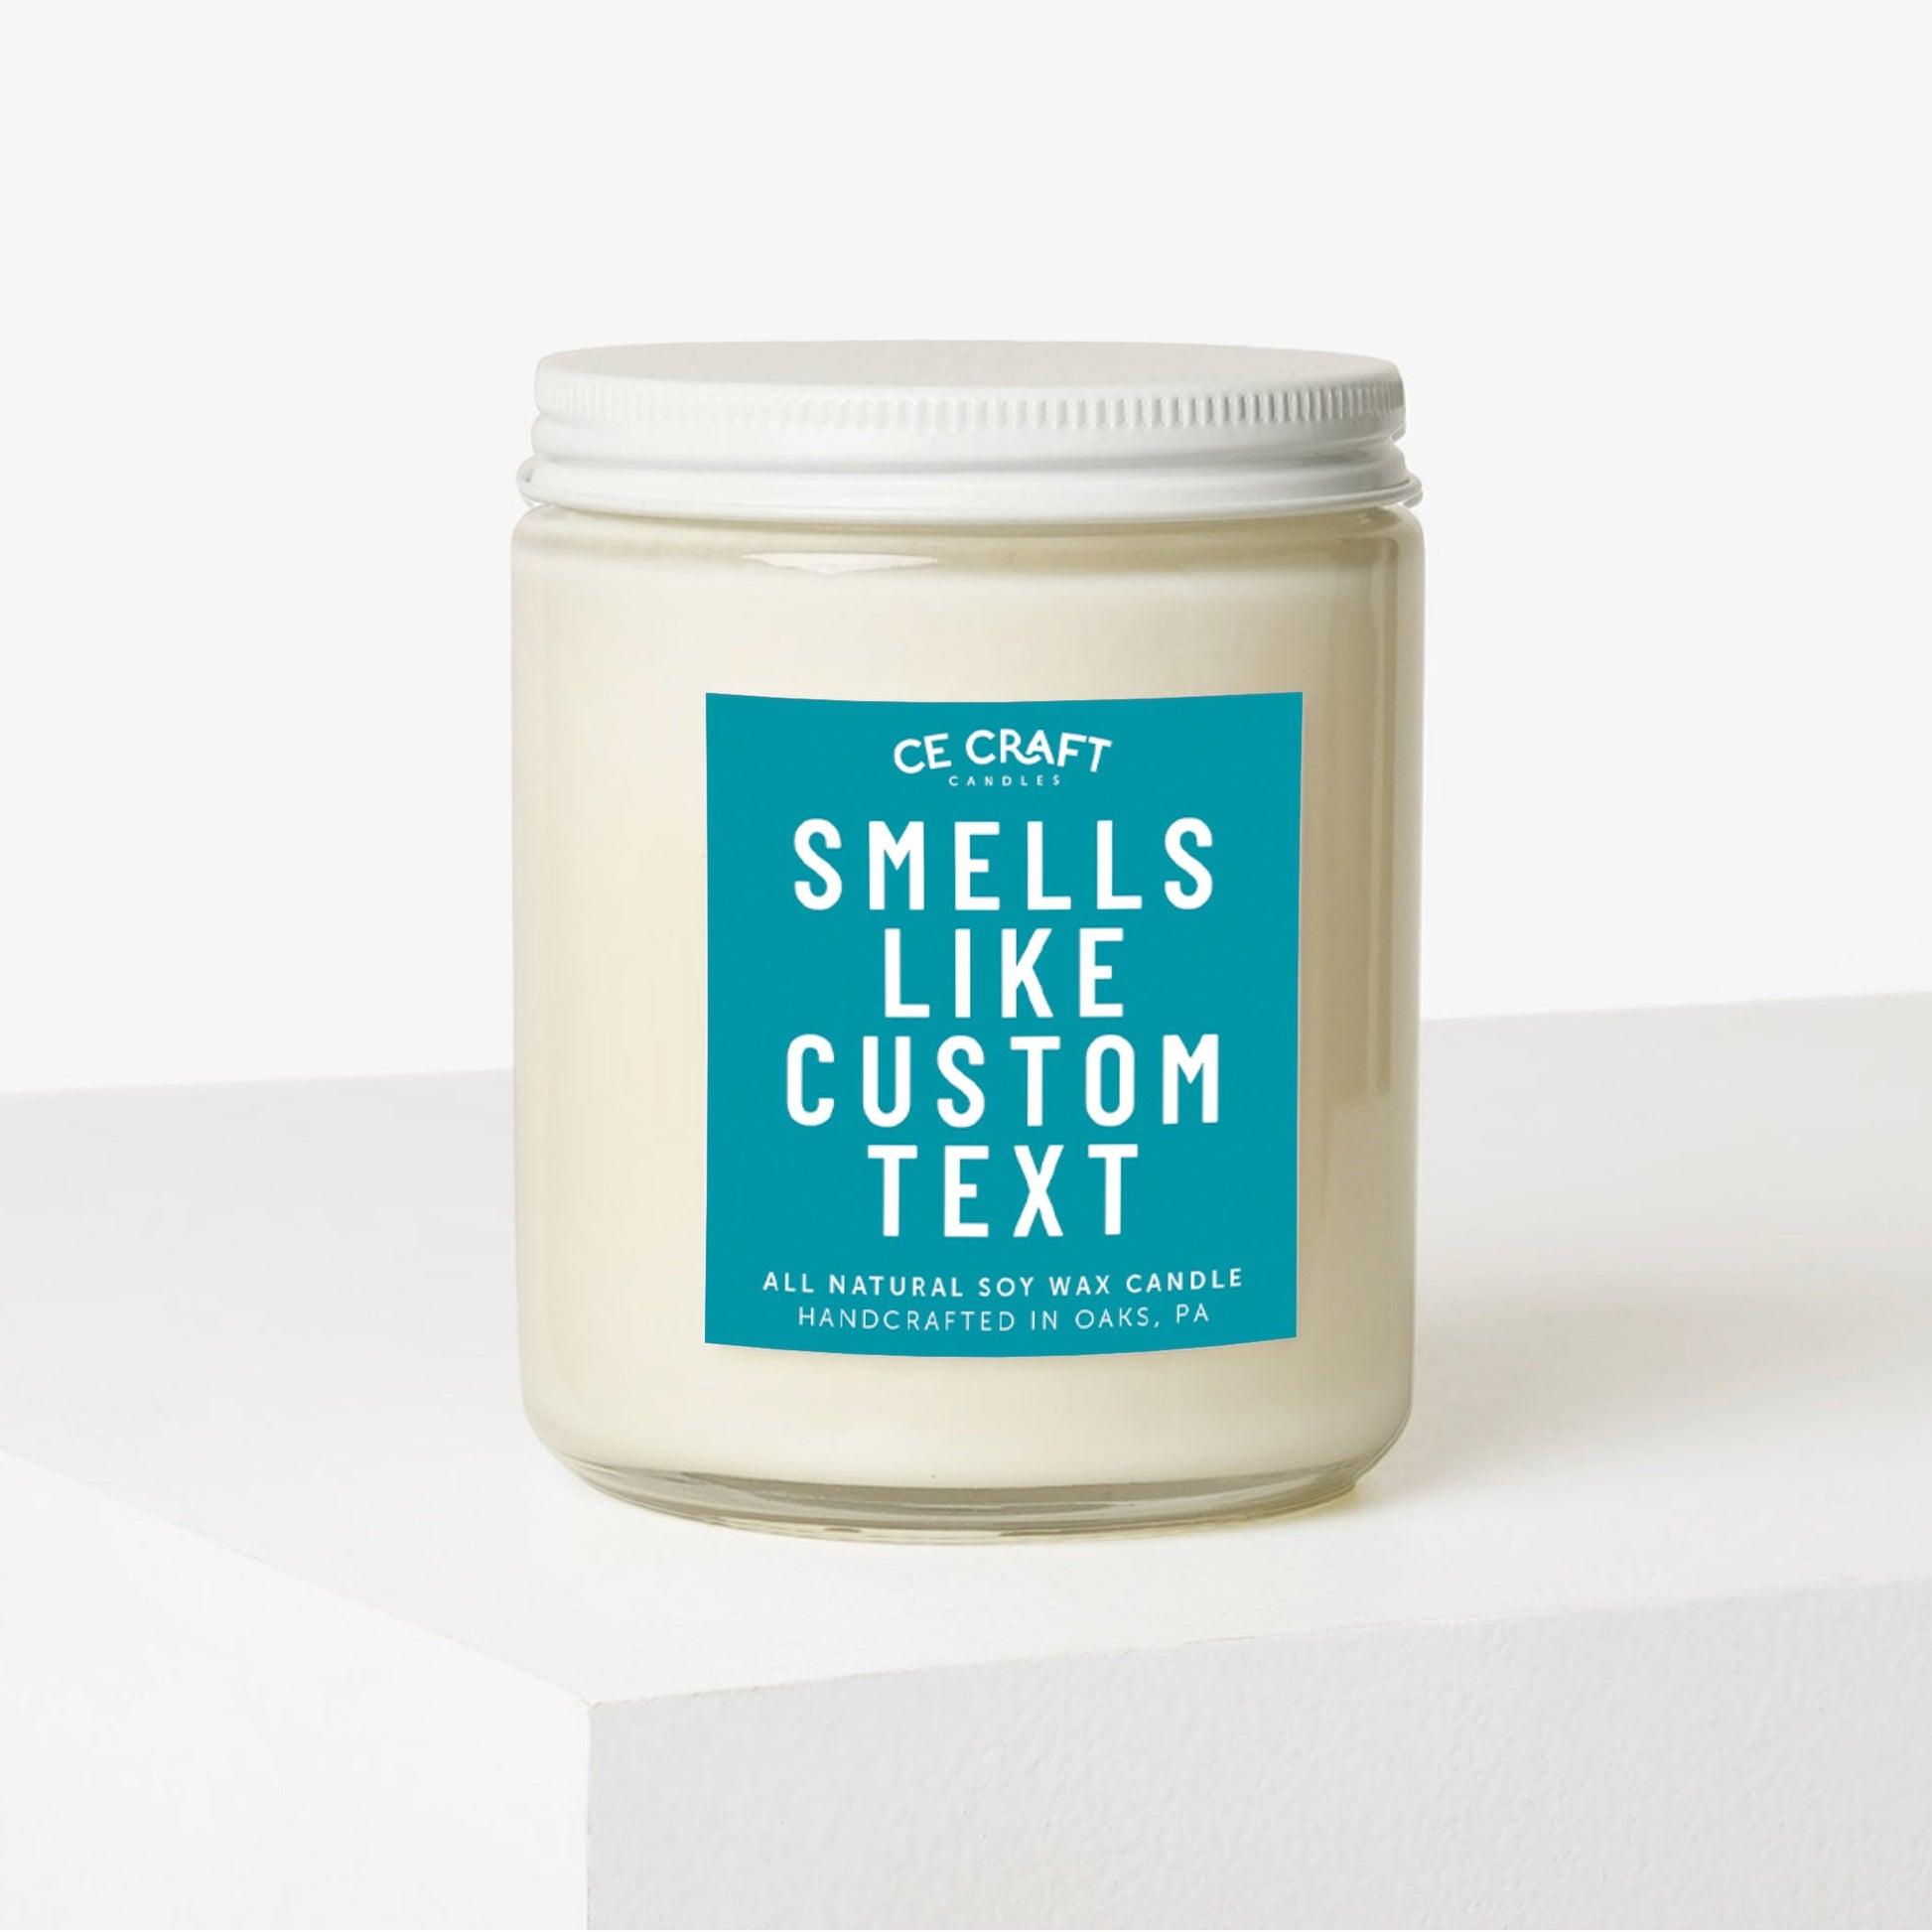 Custom Smells Like Soy Wax Candle Candles CE Craft 